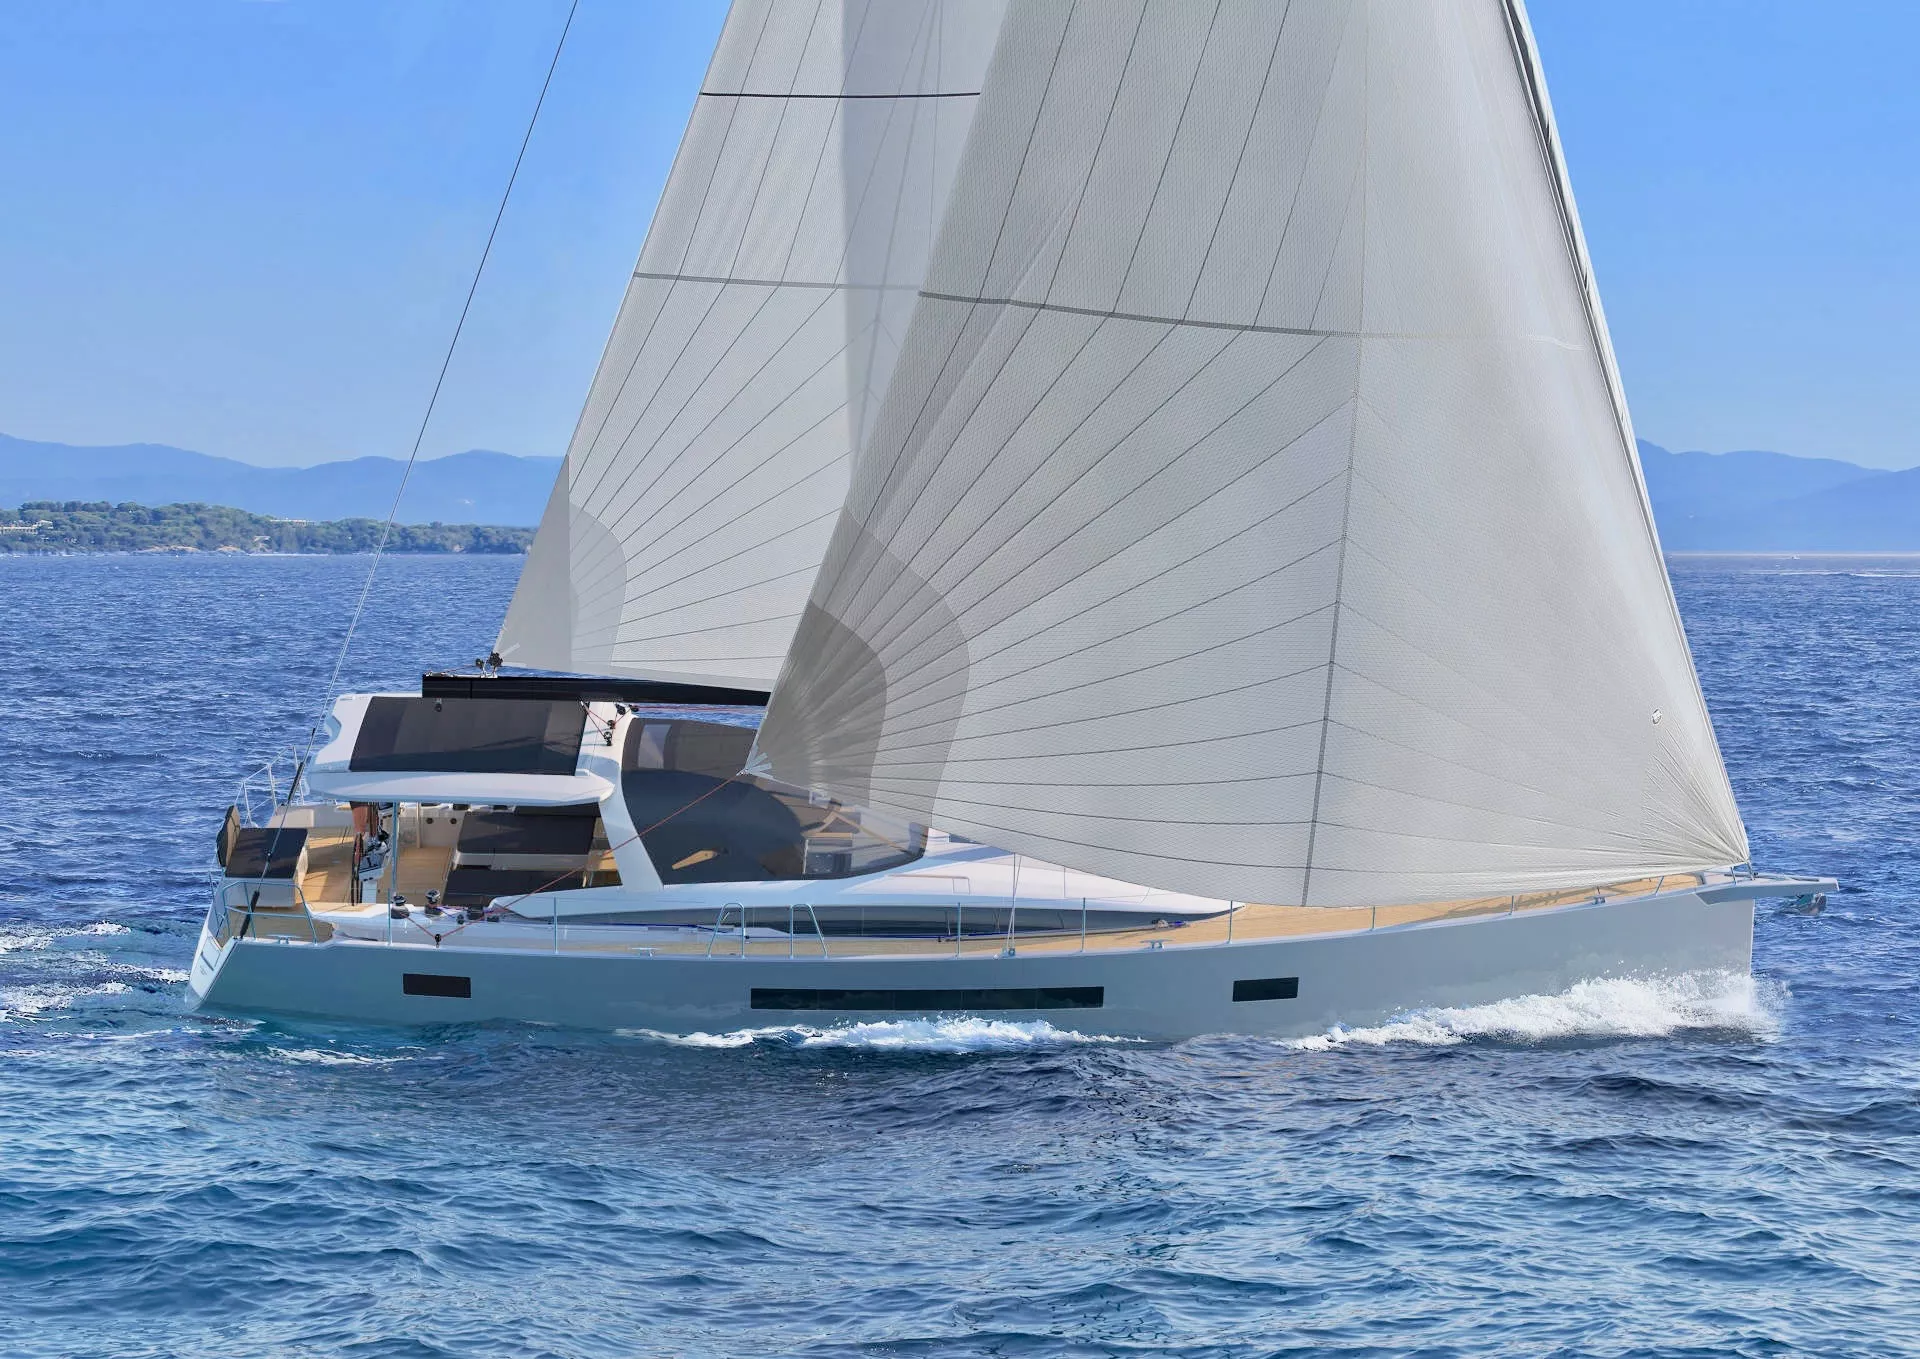 Yachting 2000 e.U. in Austria, Europe | Yachting - Rated 0.9